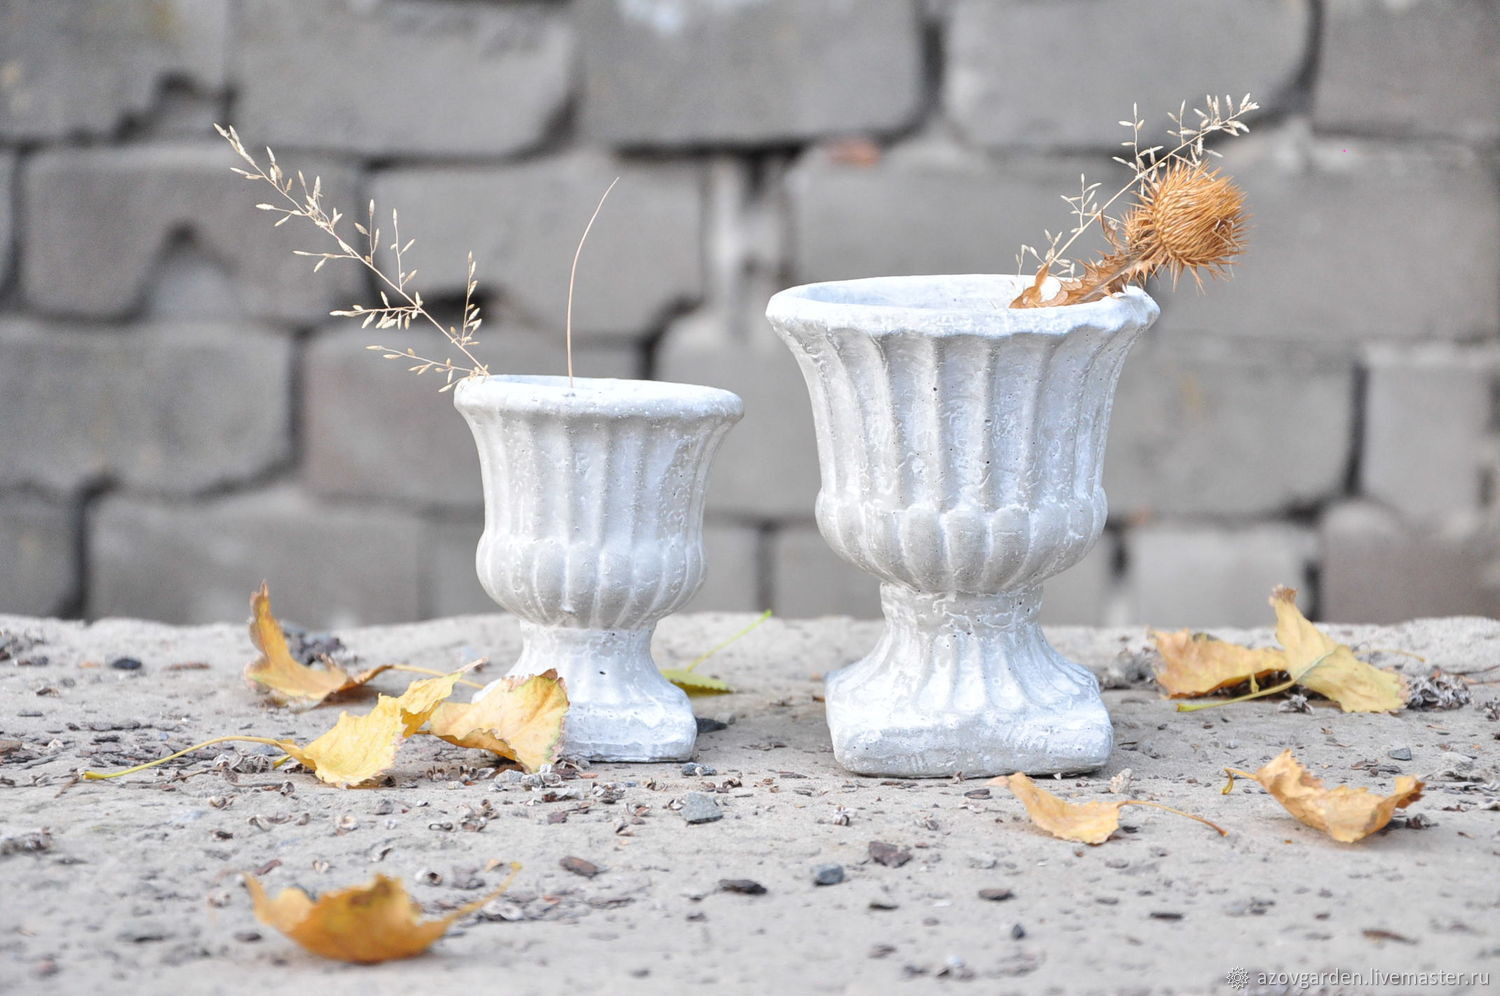 12 Popular Old Vases for Sale 2024 free download old vases for sale of set concrete mini vases for flowers provence and home decor shop with planters handmade livemaster handmade buy set concrete mini vases for flowers provence